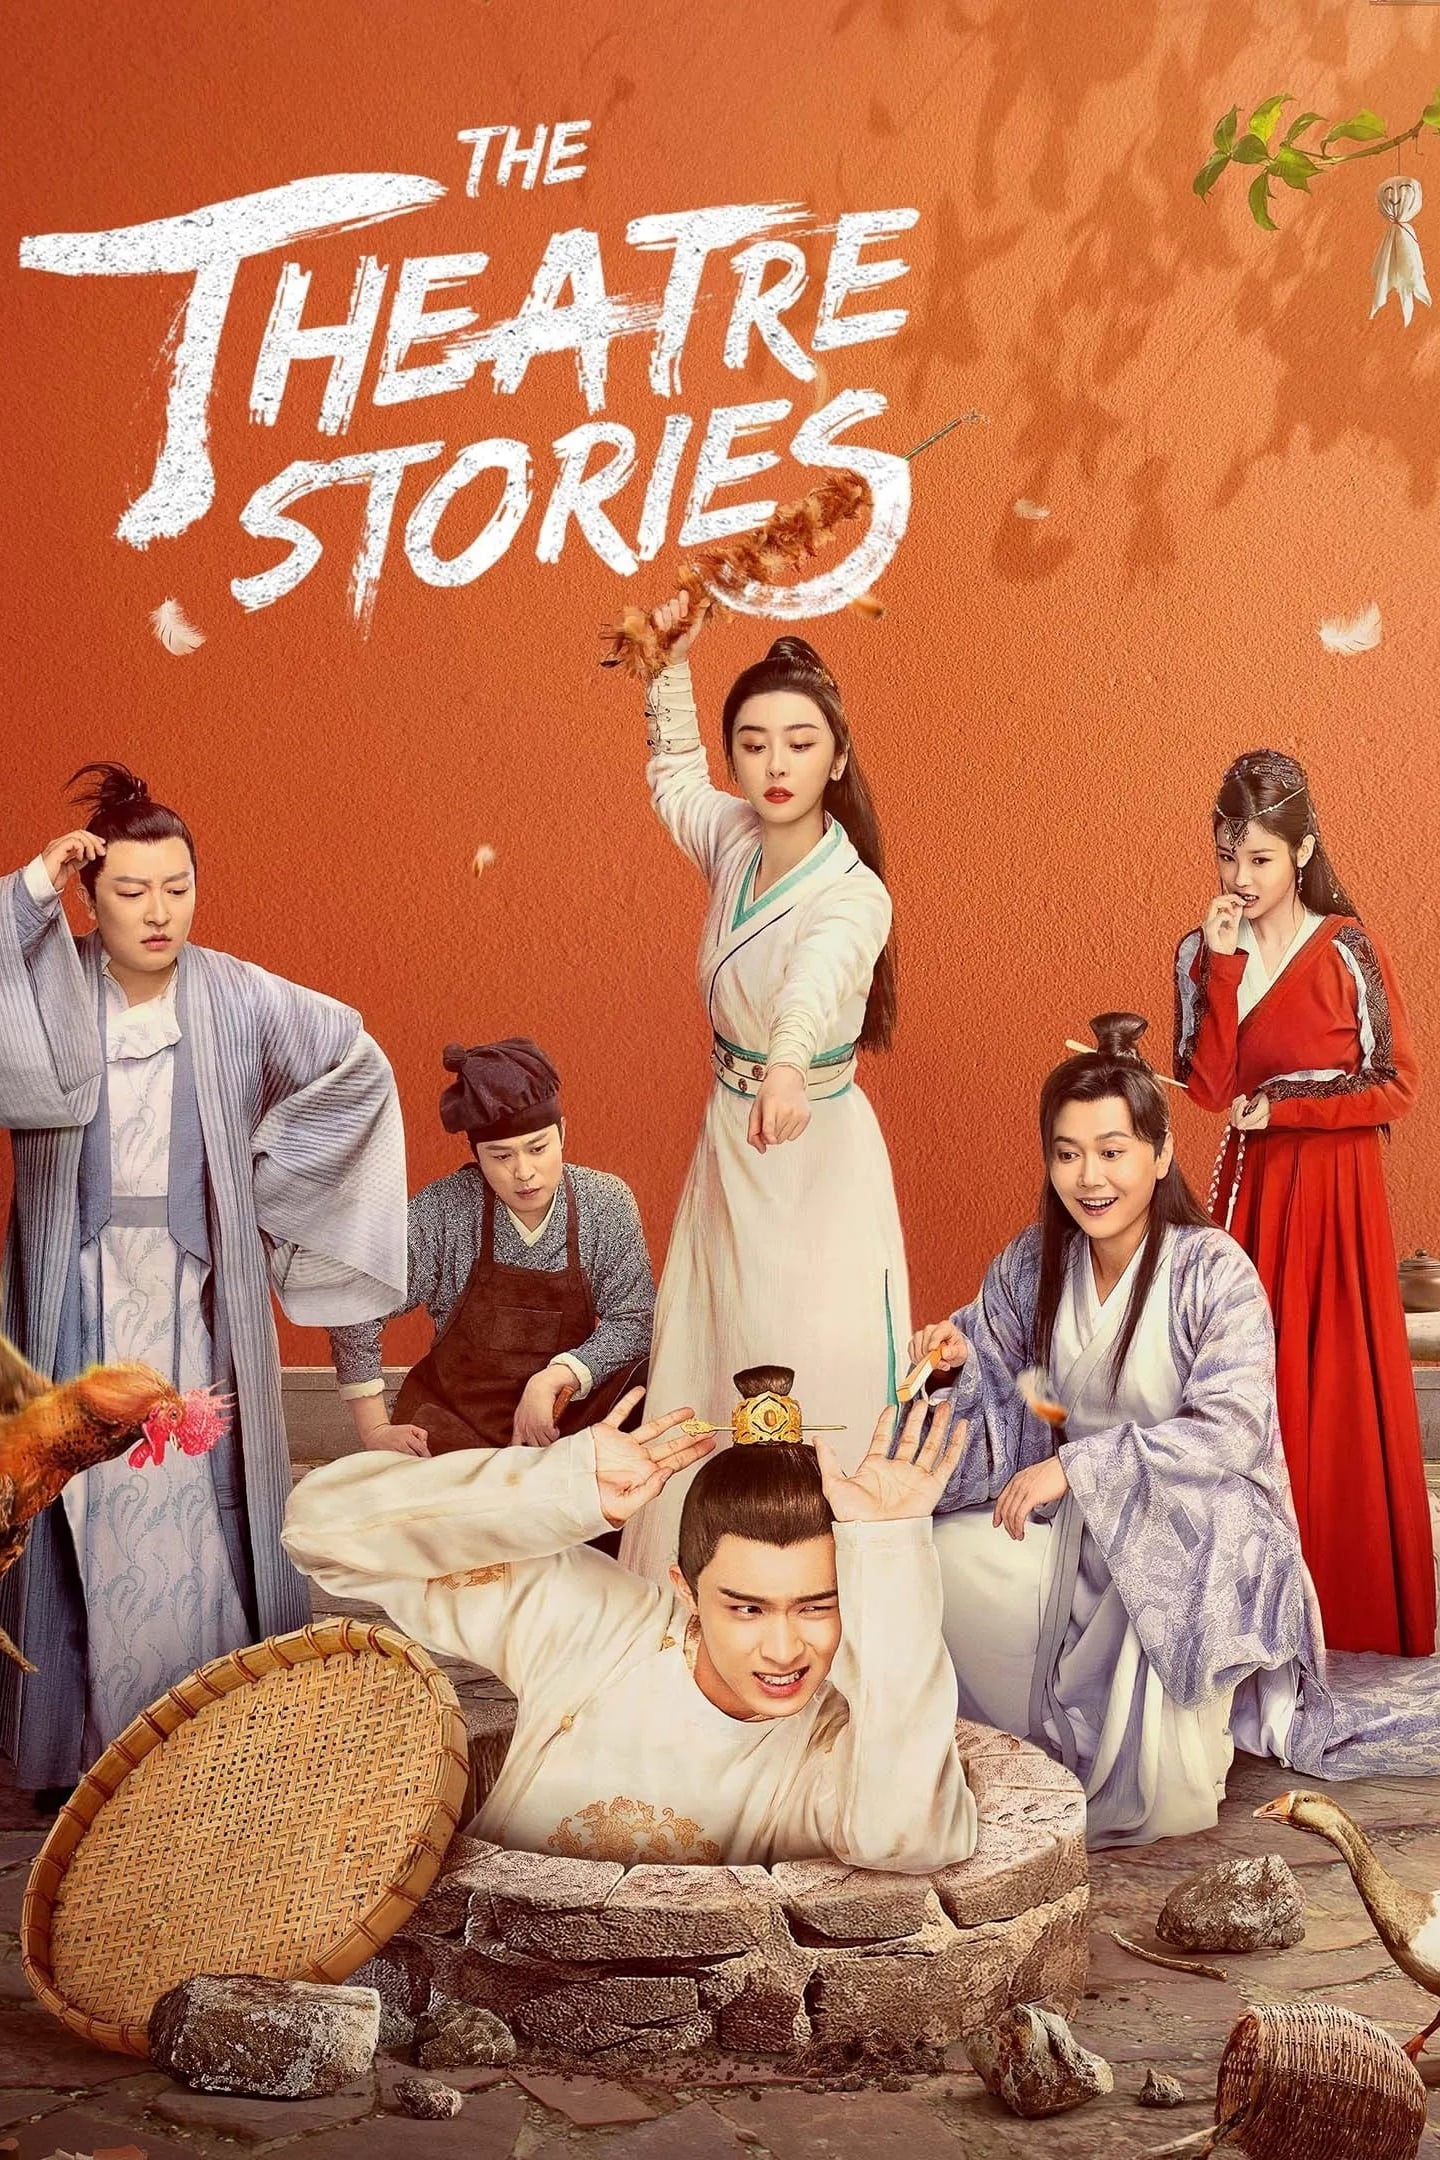 The Theatre Stories